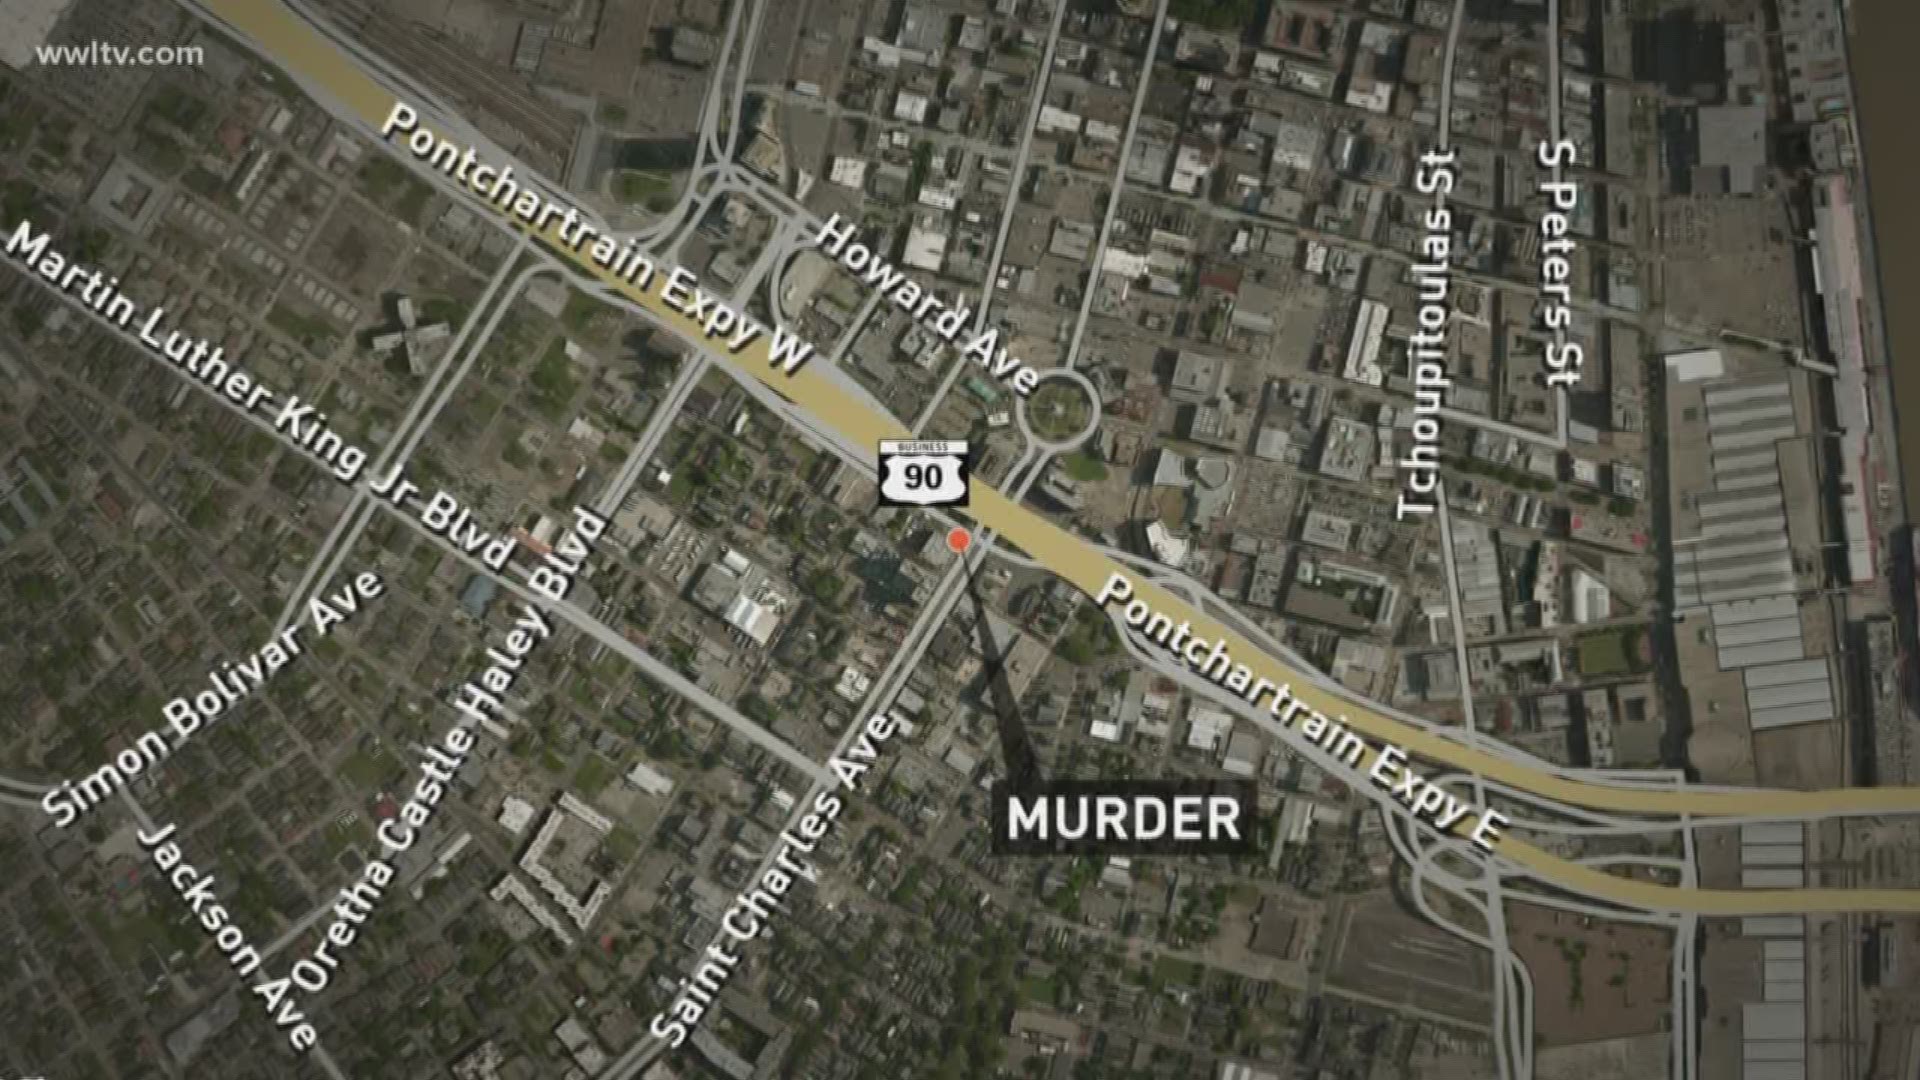 A man was found stabbed to death on St. Charles Avenue Sunday.